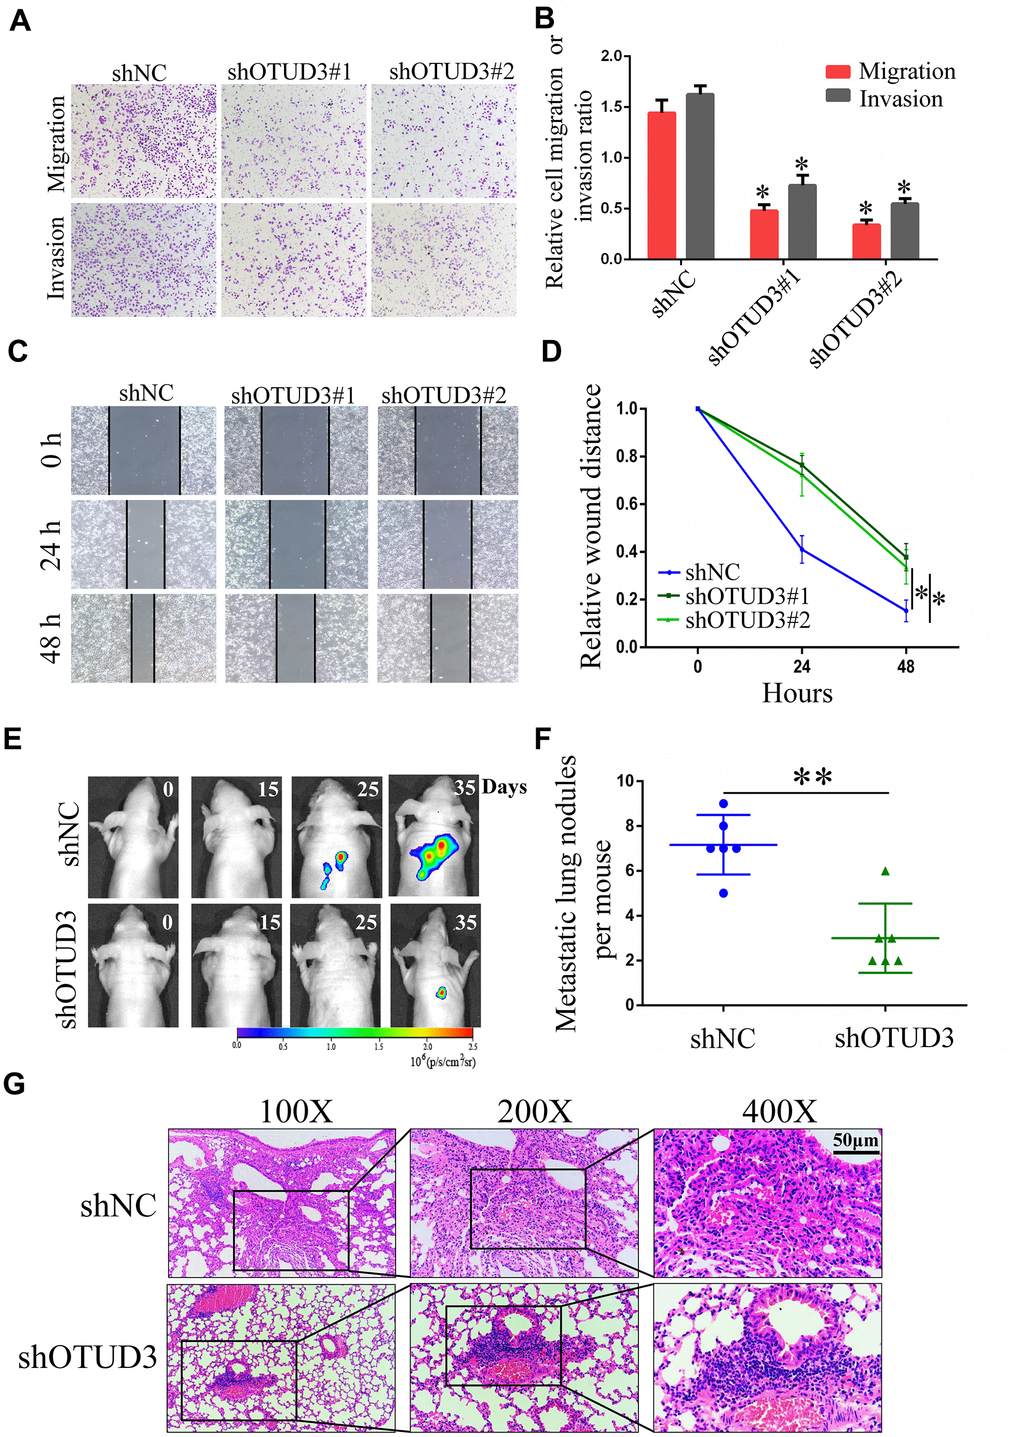 OTUD3 downregulation inhibits HCC cells migration and invasion in vitro and in vivo. (A, B) Invasion and migration assays were employed to evaluate the effect of OTUD3 knockdown on HCCLM3 cells metastatic ability (Magnification 200X). (C, D) Scratching assay was performed to detect migration ability of OTUD3 knockdown HCCLM3 cells compared with the control group. (E) In vivo tumour metastasis was examined using the nude mice (n=6 per group) injected with luciferase-expressing HCCLM3 cells stably transfected with shNC or shRNA targeting OTUD3 and was detected by IVIS from day 0 to day 35. Representative images obtained are shown. (F) Quantification of metastatic lung nodules with shNC and shOTUD3 HCCLM3 cells by tail-vein injection. (G) Images of H&E staining of paraffin-embedded lung tissues from shNC and shOTUD3 nude mice group (Magnification: 100X, 200X, 400X). The unpaired two-sided Student’s t test was used for comparing between two groups of equal variances. Error bars represent mean ± SD from three independent experiments. *PP